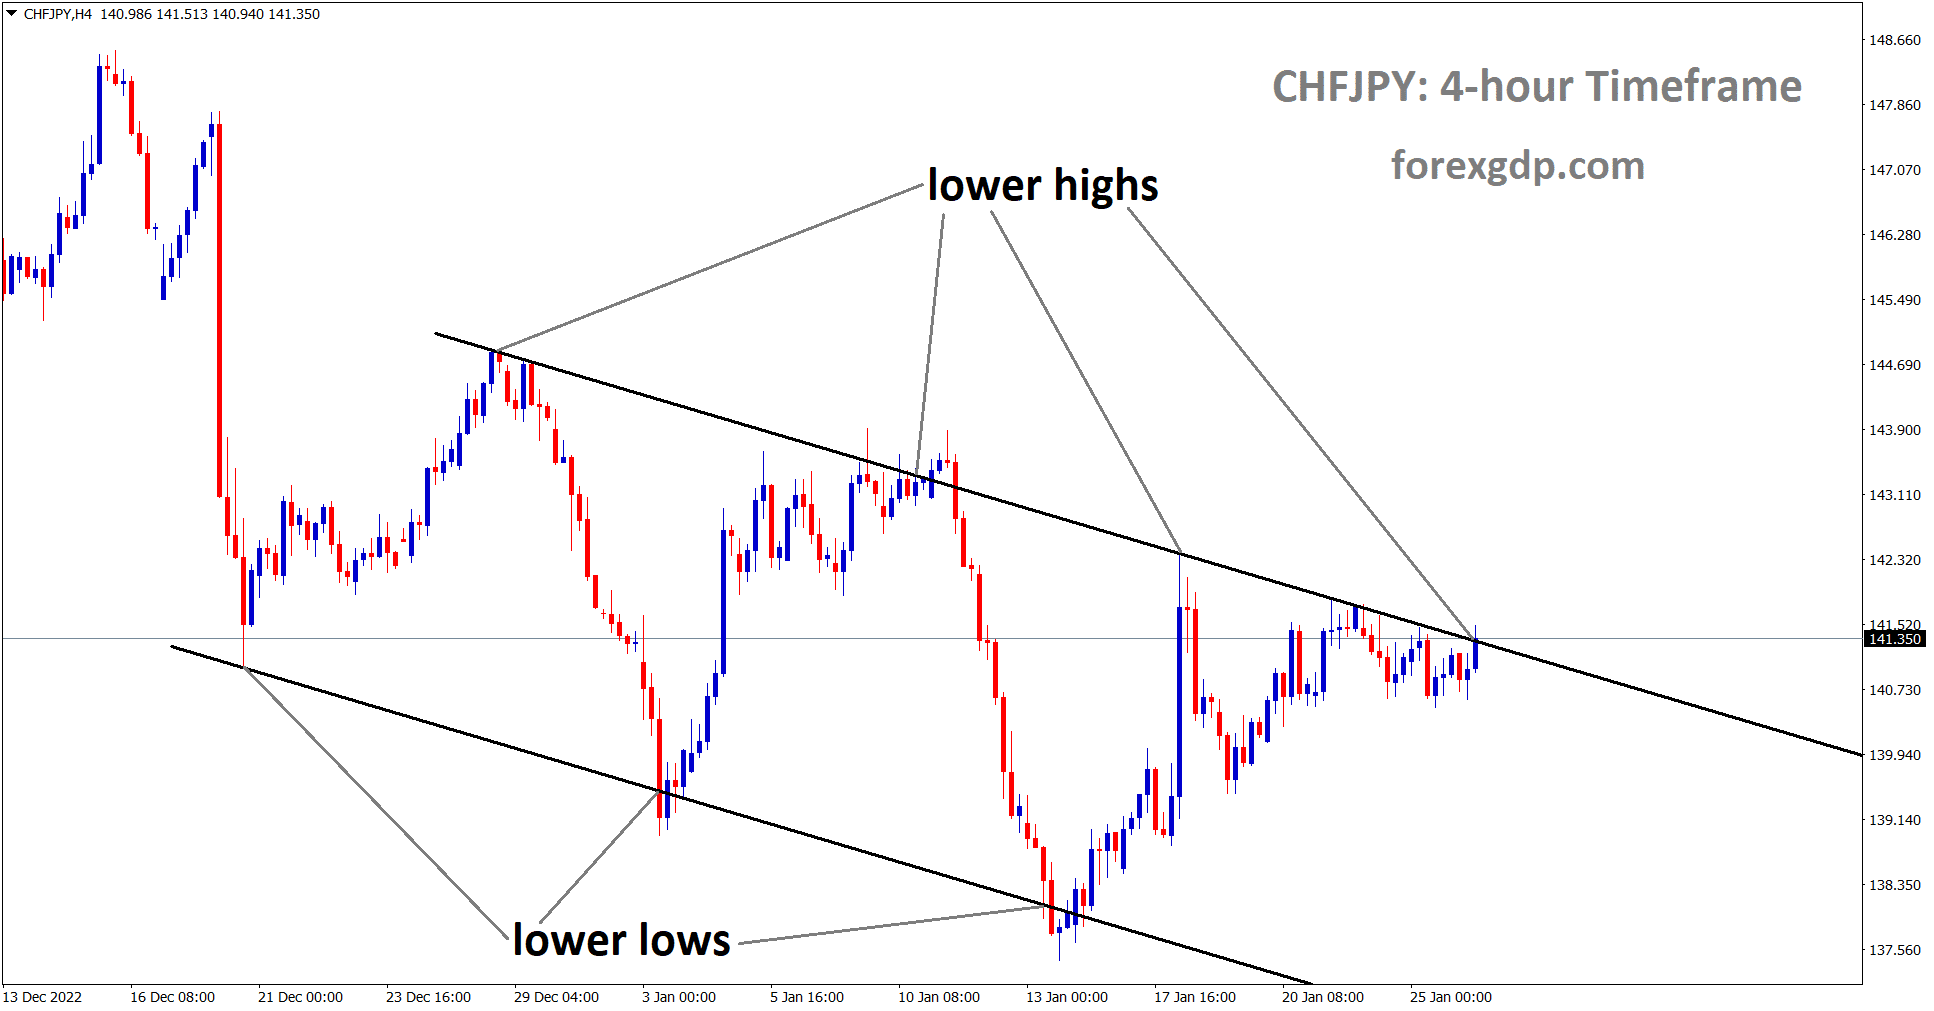 CHFJPY is moving in Descending Channel and the market has reached the lower high area of the channel.